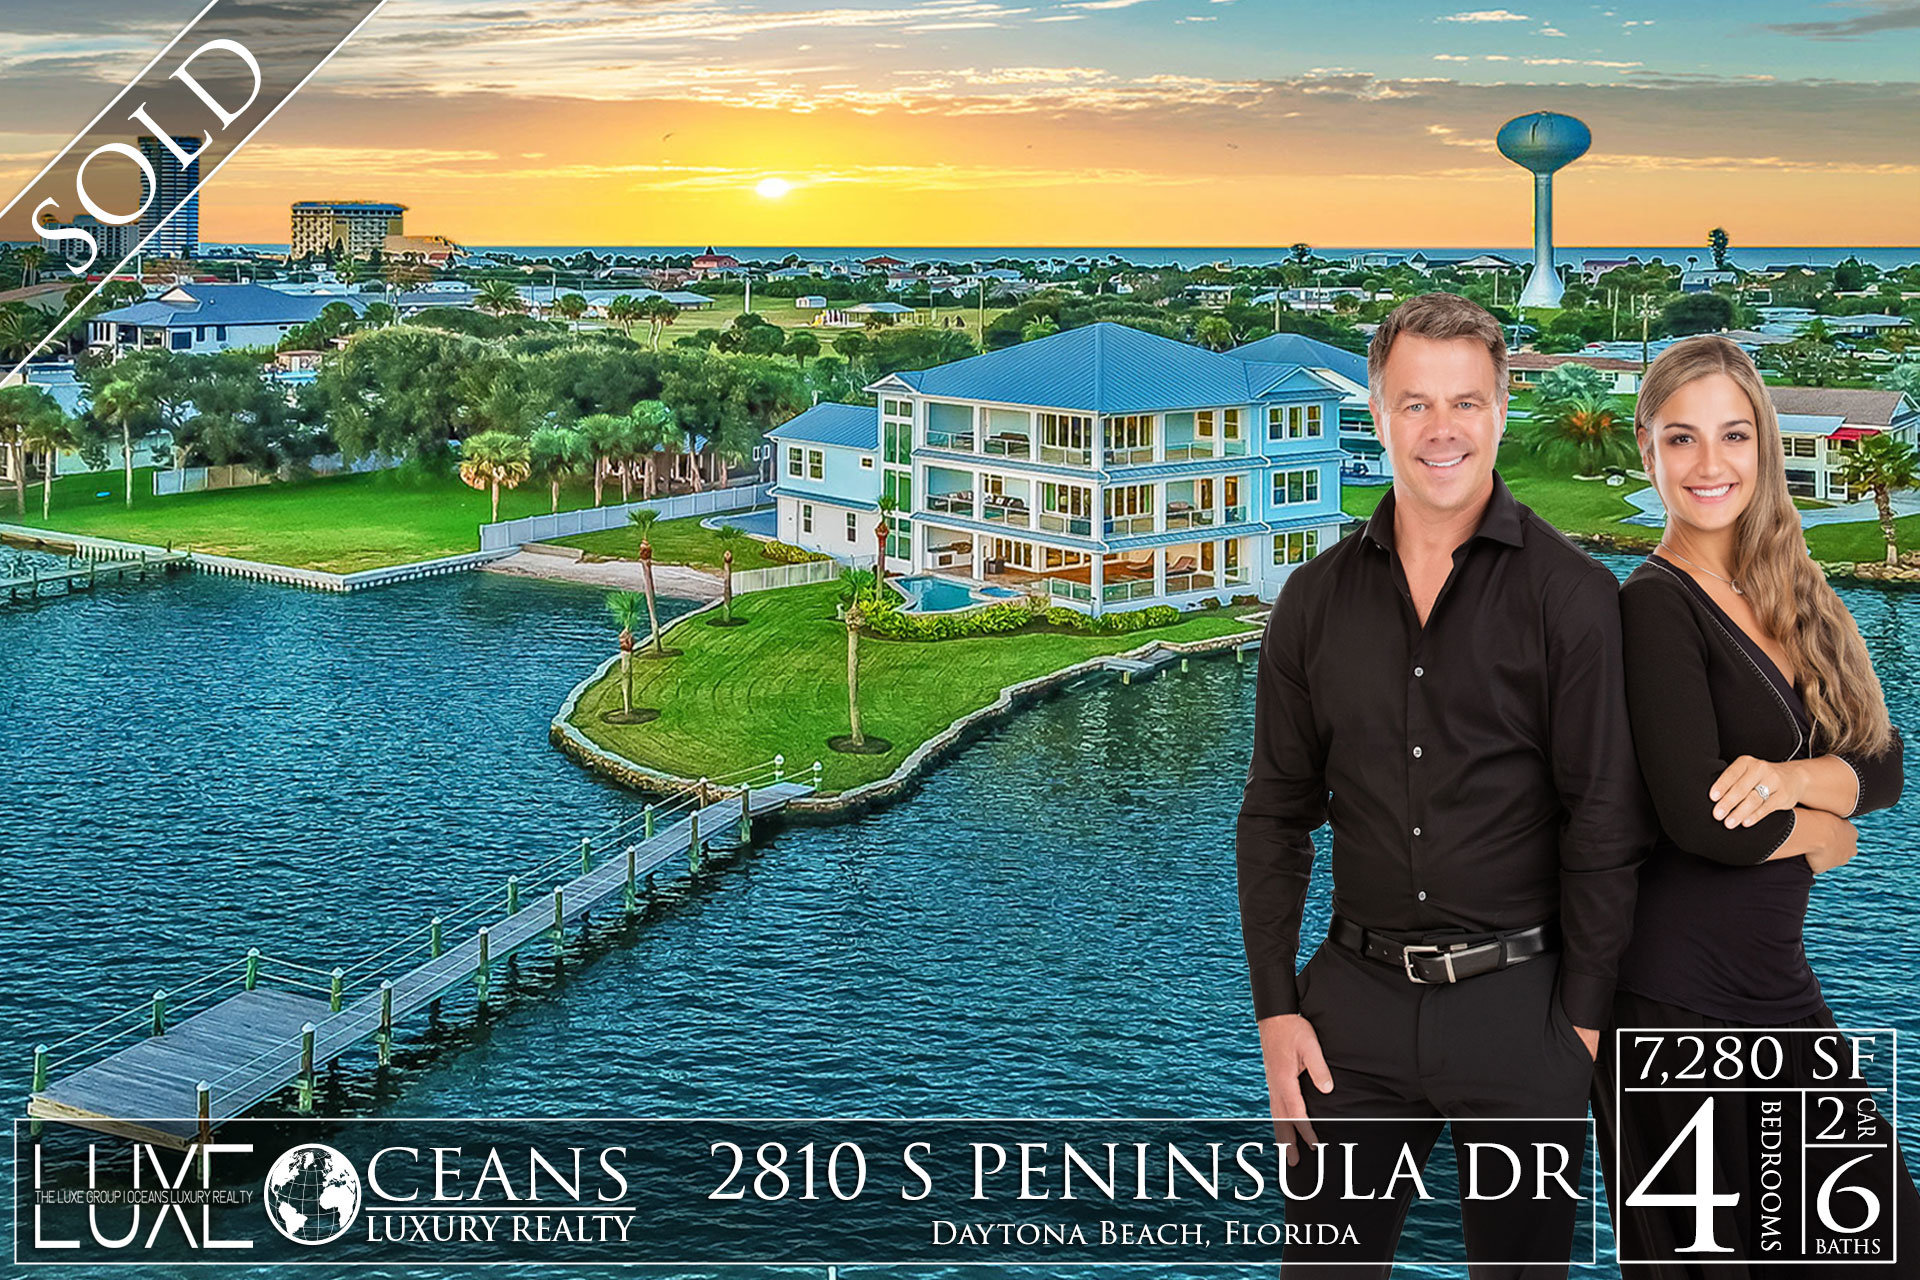 Daytona Beach Riverfront Homes For Sale - 2810 S Peninsula Drive Waterfront Homes Sold